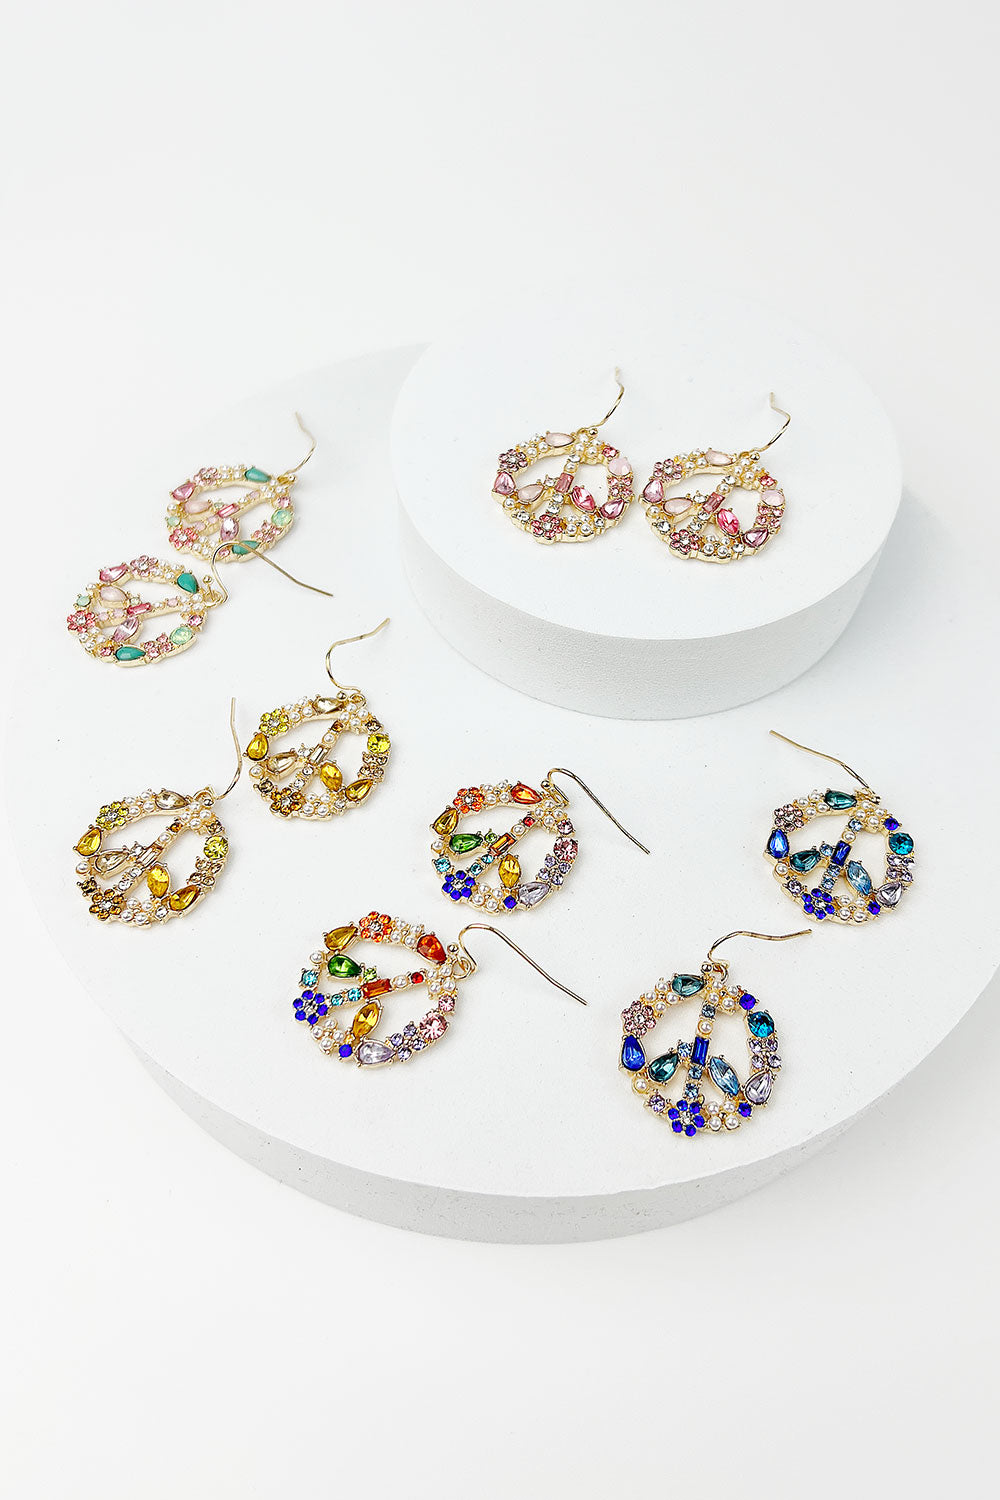 ROUND SHAPED WITH COLORFUL CRYSTALS PAVED HOOK EARRING